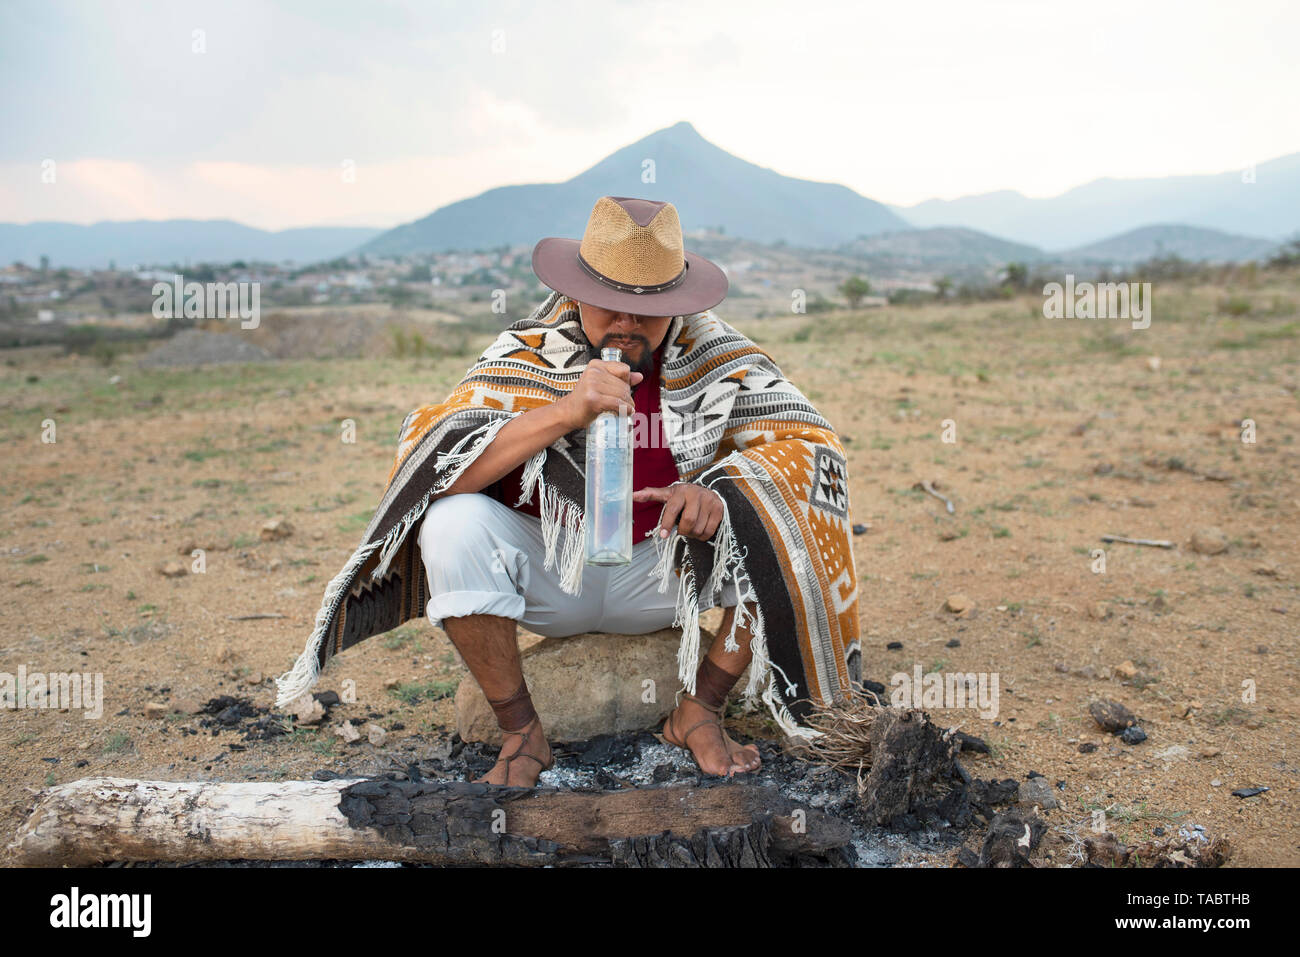 Zapotec (Mexican) man wearing a hat, Zapotec rug and ancient sandals drinking a bottle of Mezcal. Oaxaca State, Mexico Stock Photo